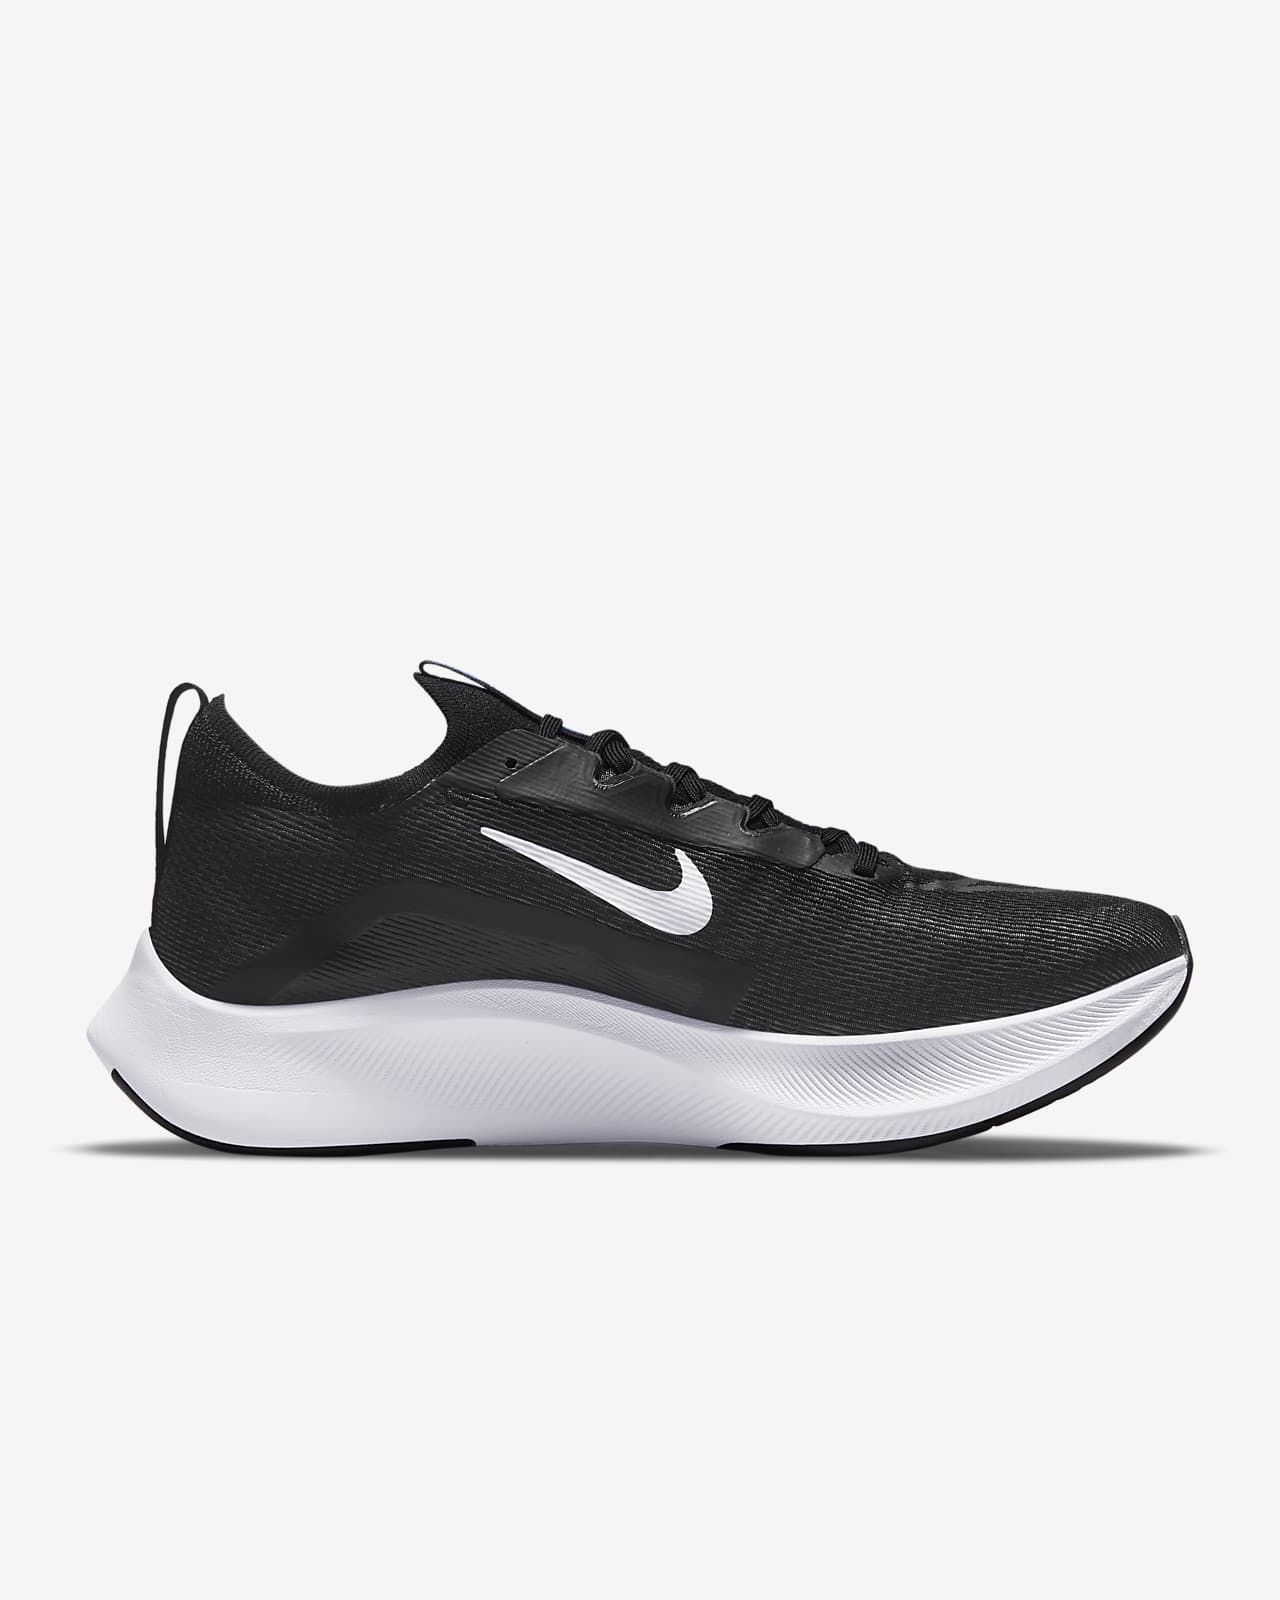 Nike Zoom Fly 4 Men's Road Running Shoes. Nike IL